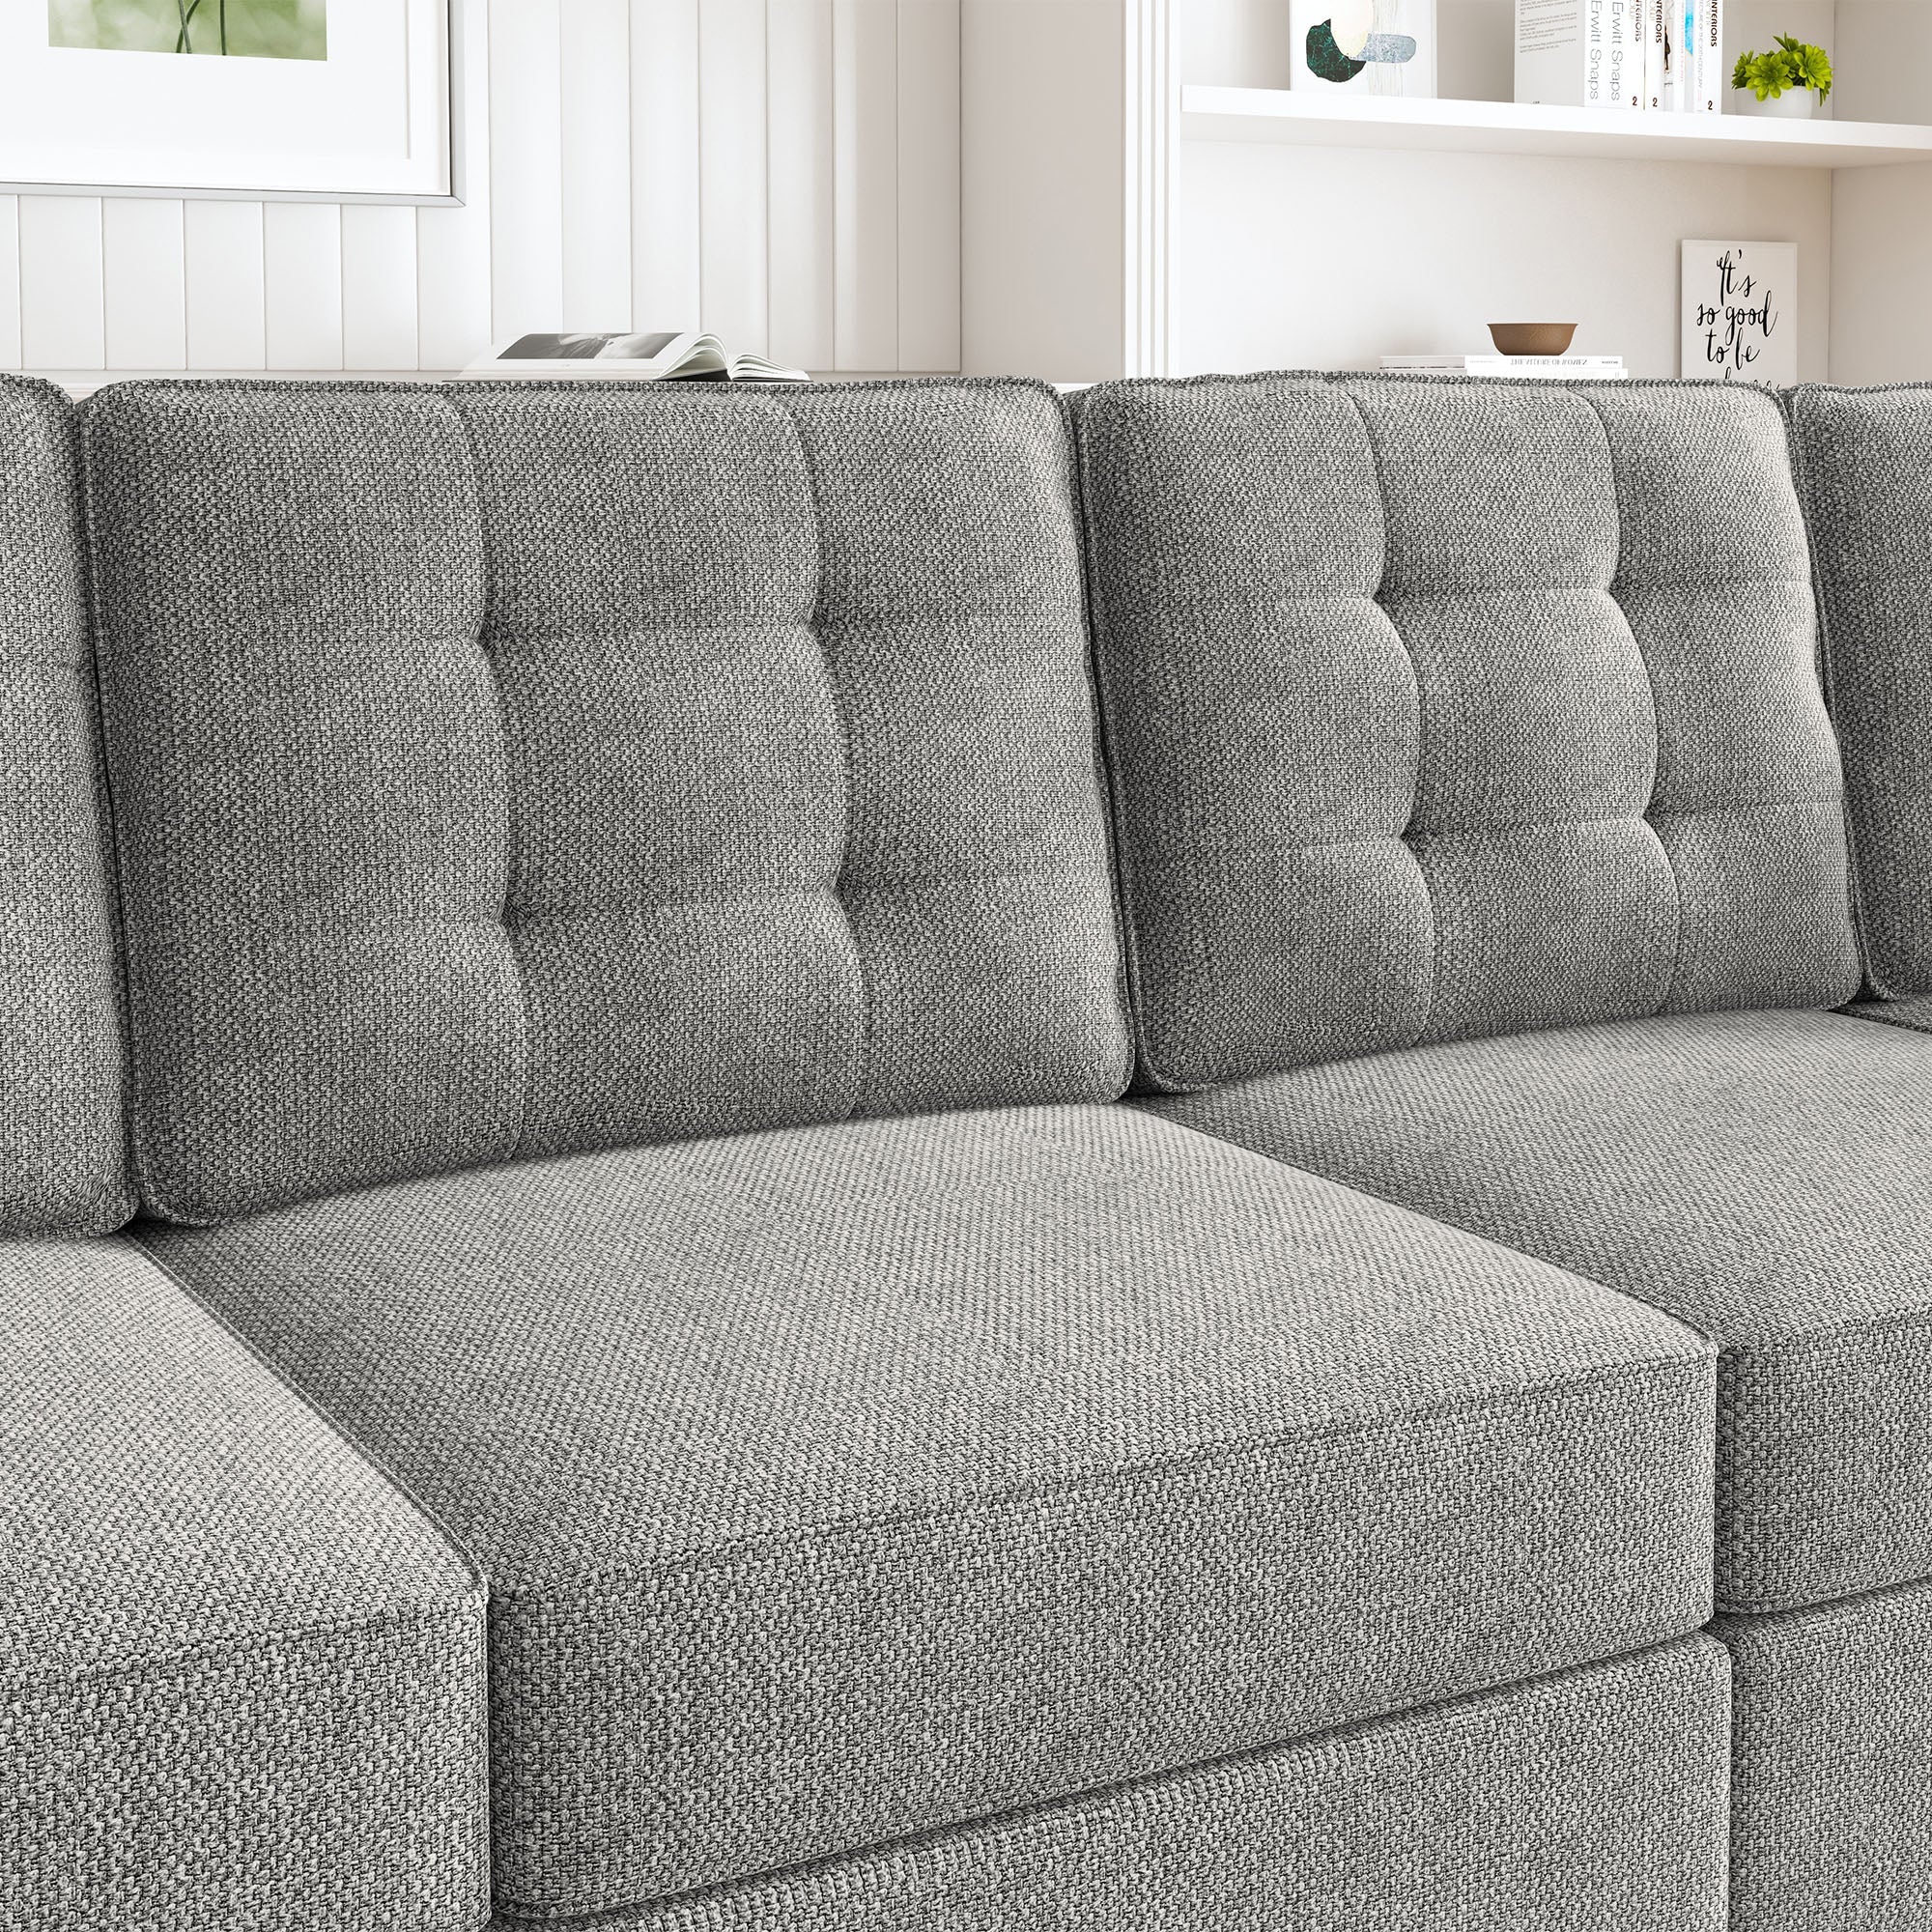 HONBAY 4-Seat Sectional Sofa Bed Couch with Storage Ottoman & Convertible Pit Sofa